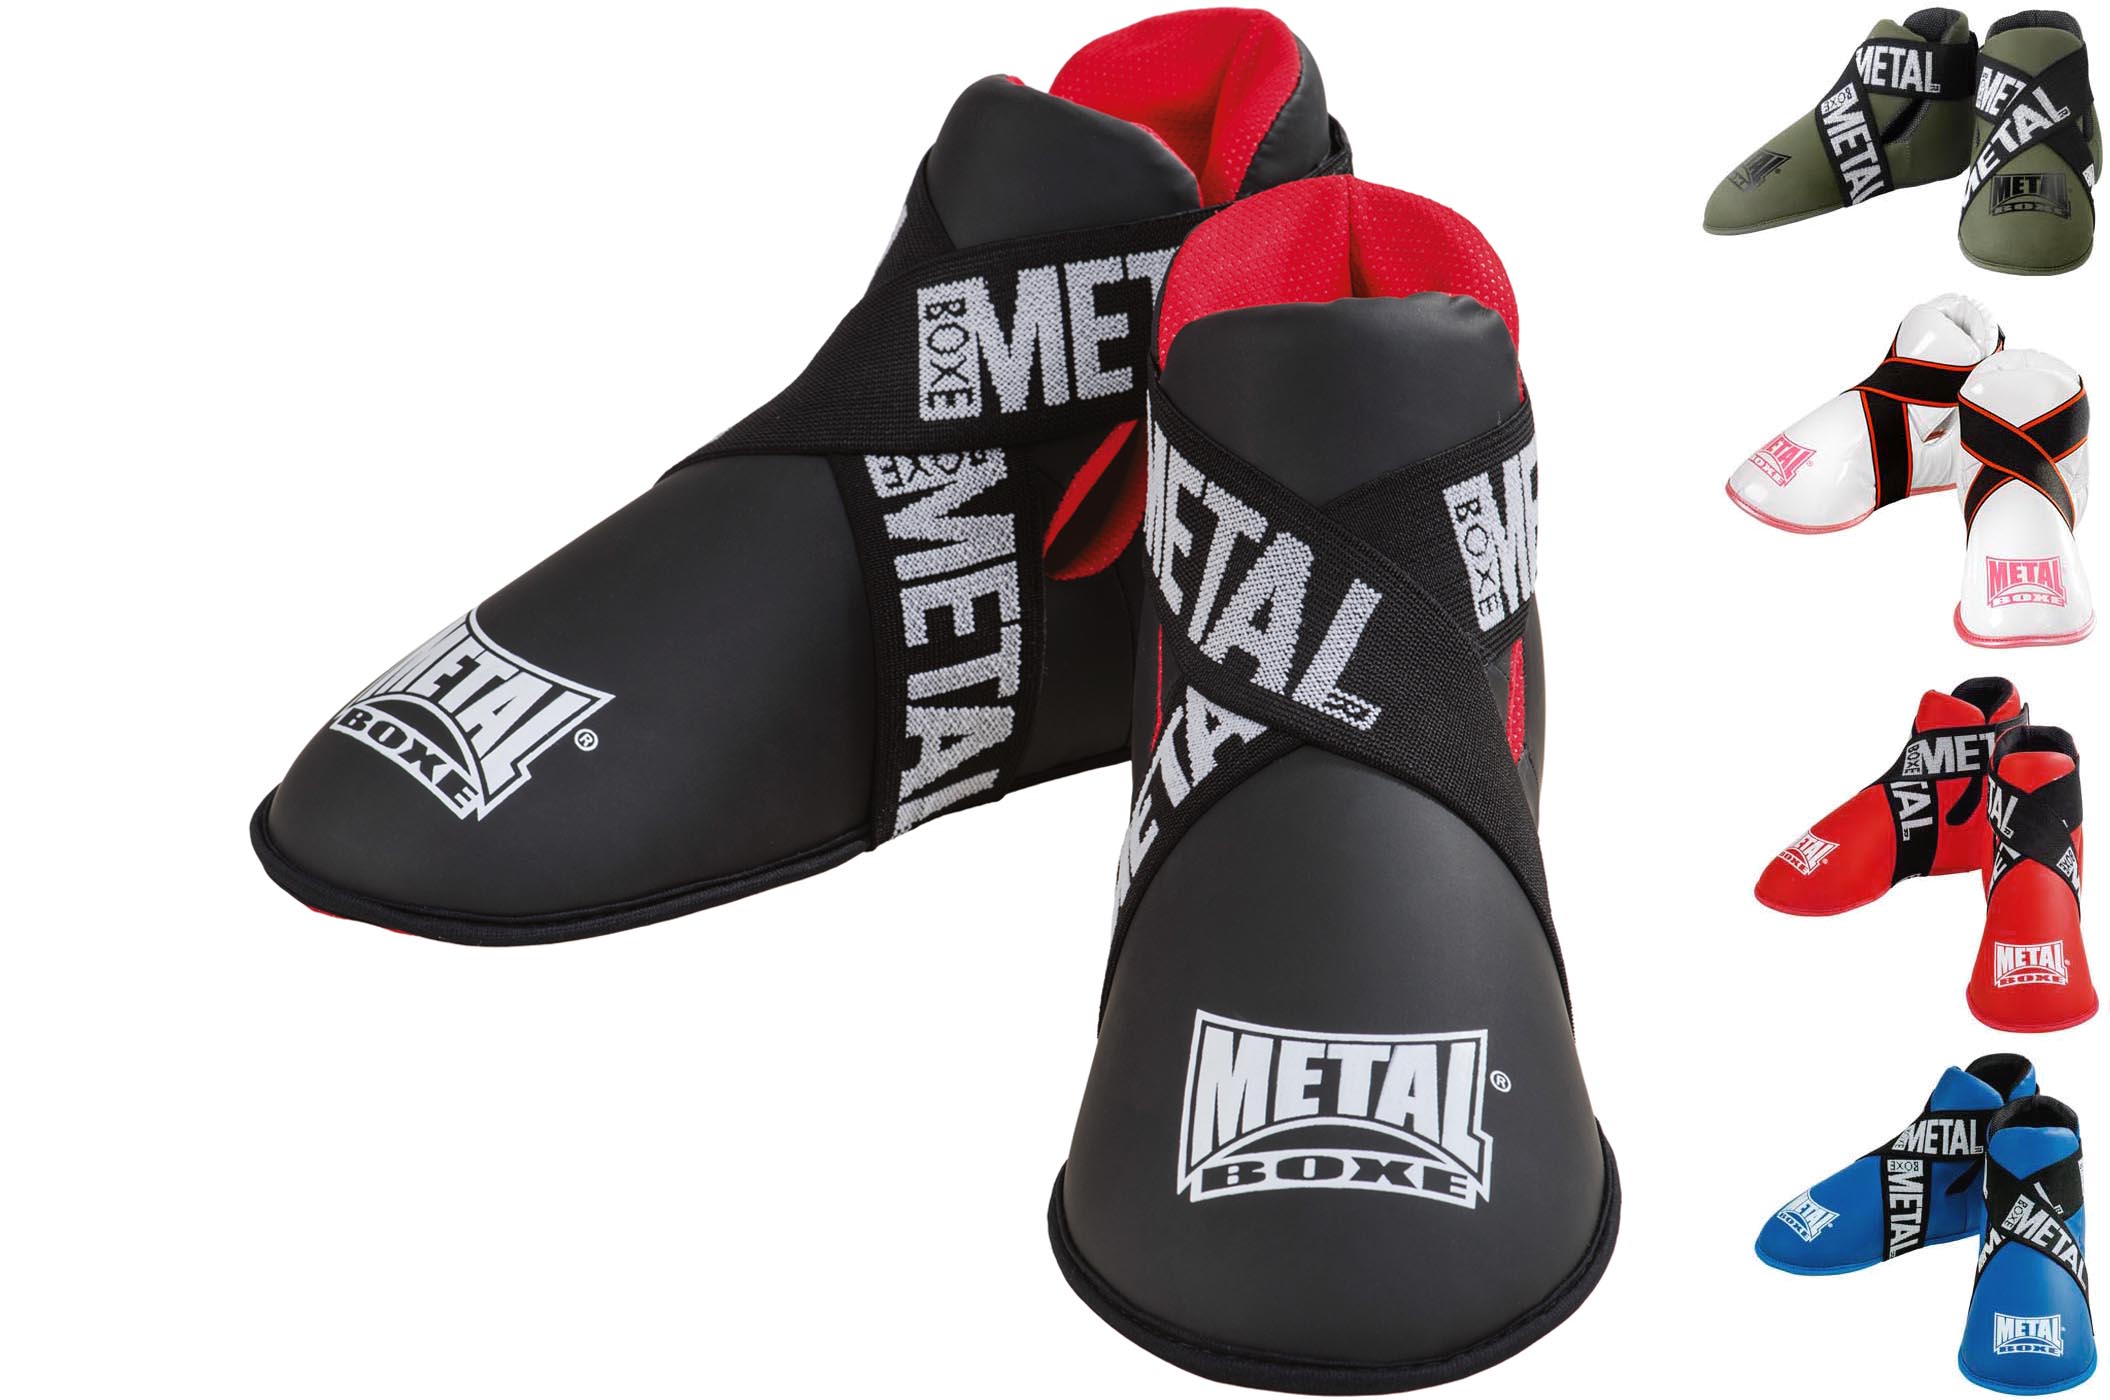 METAL BOXE Protège Pied Full Contact Enfant